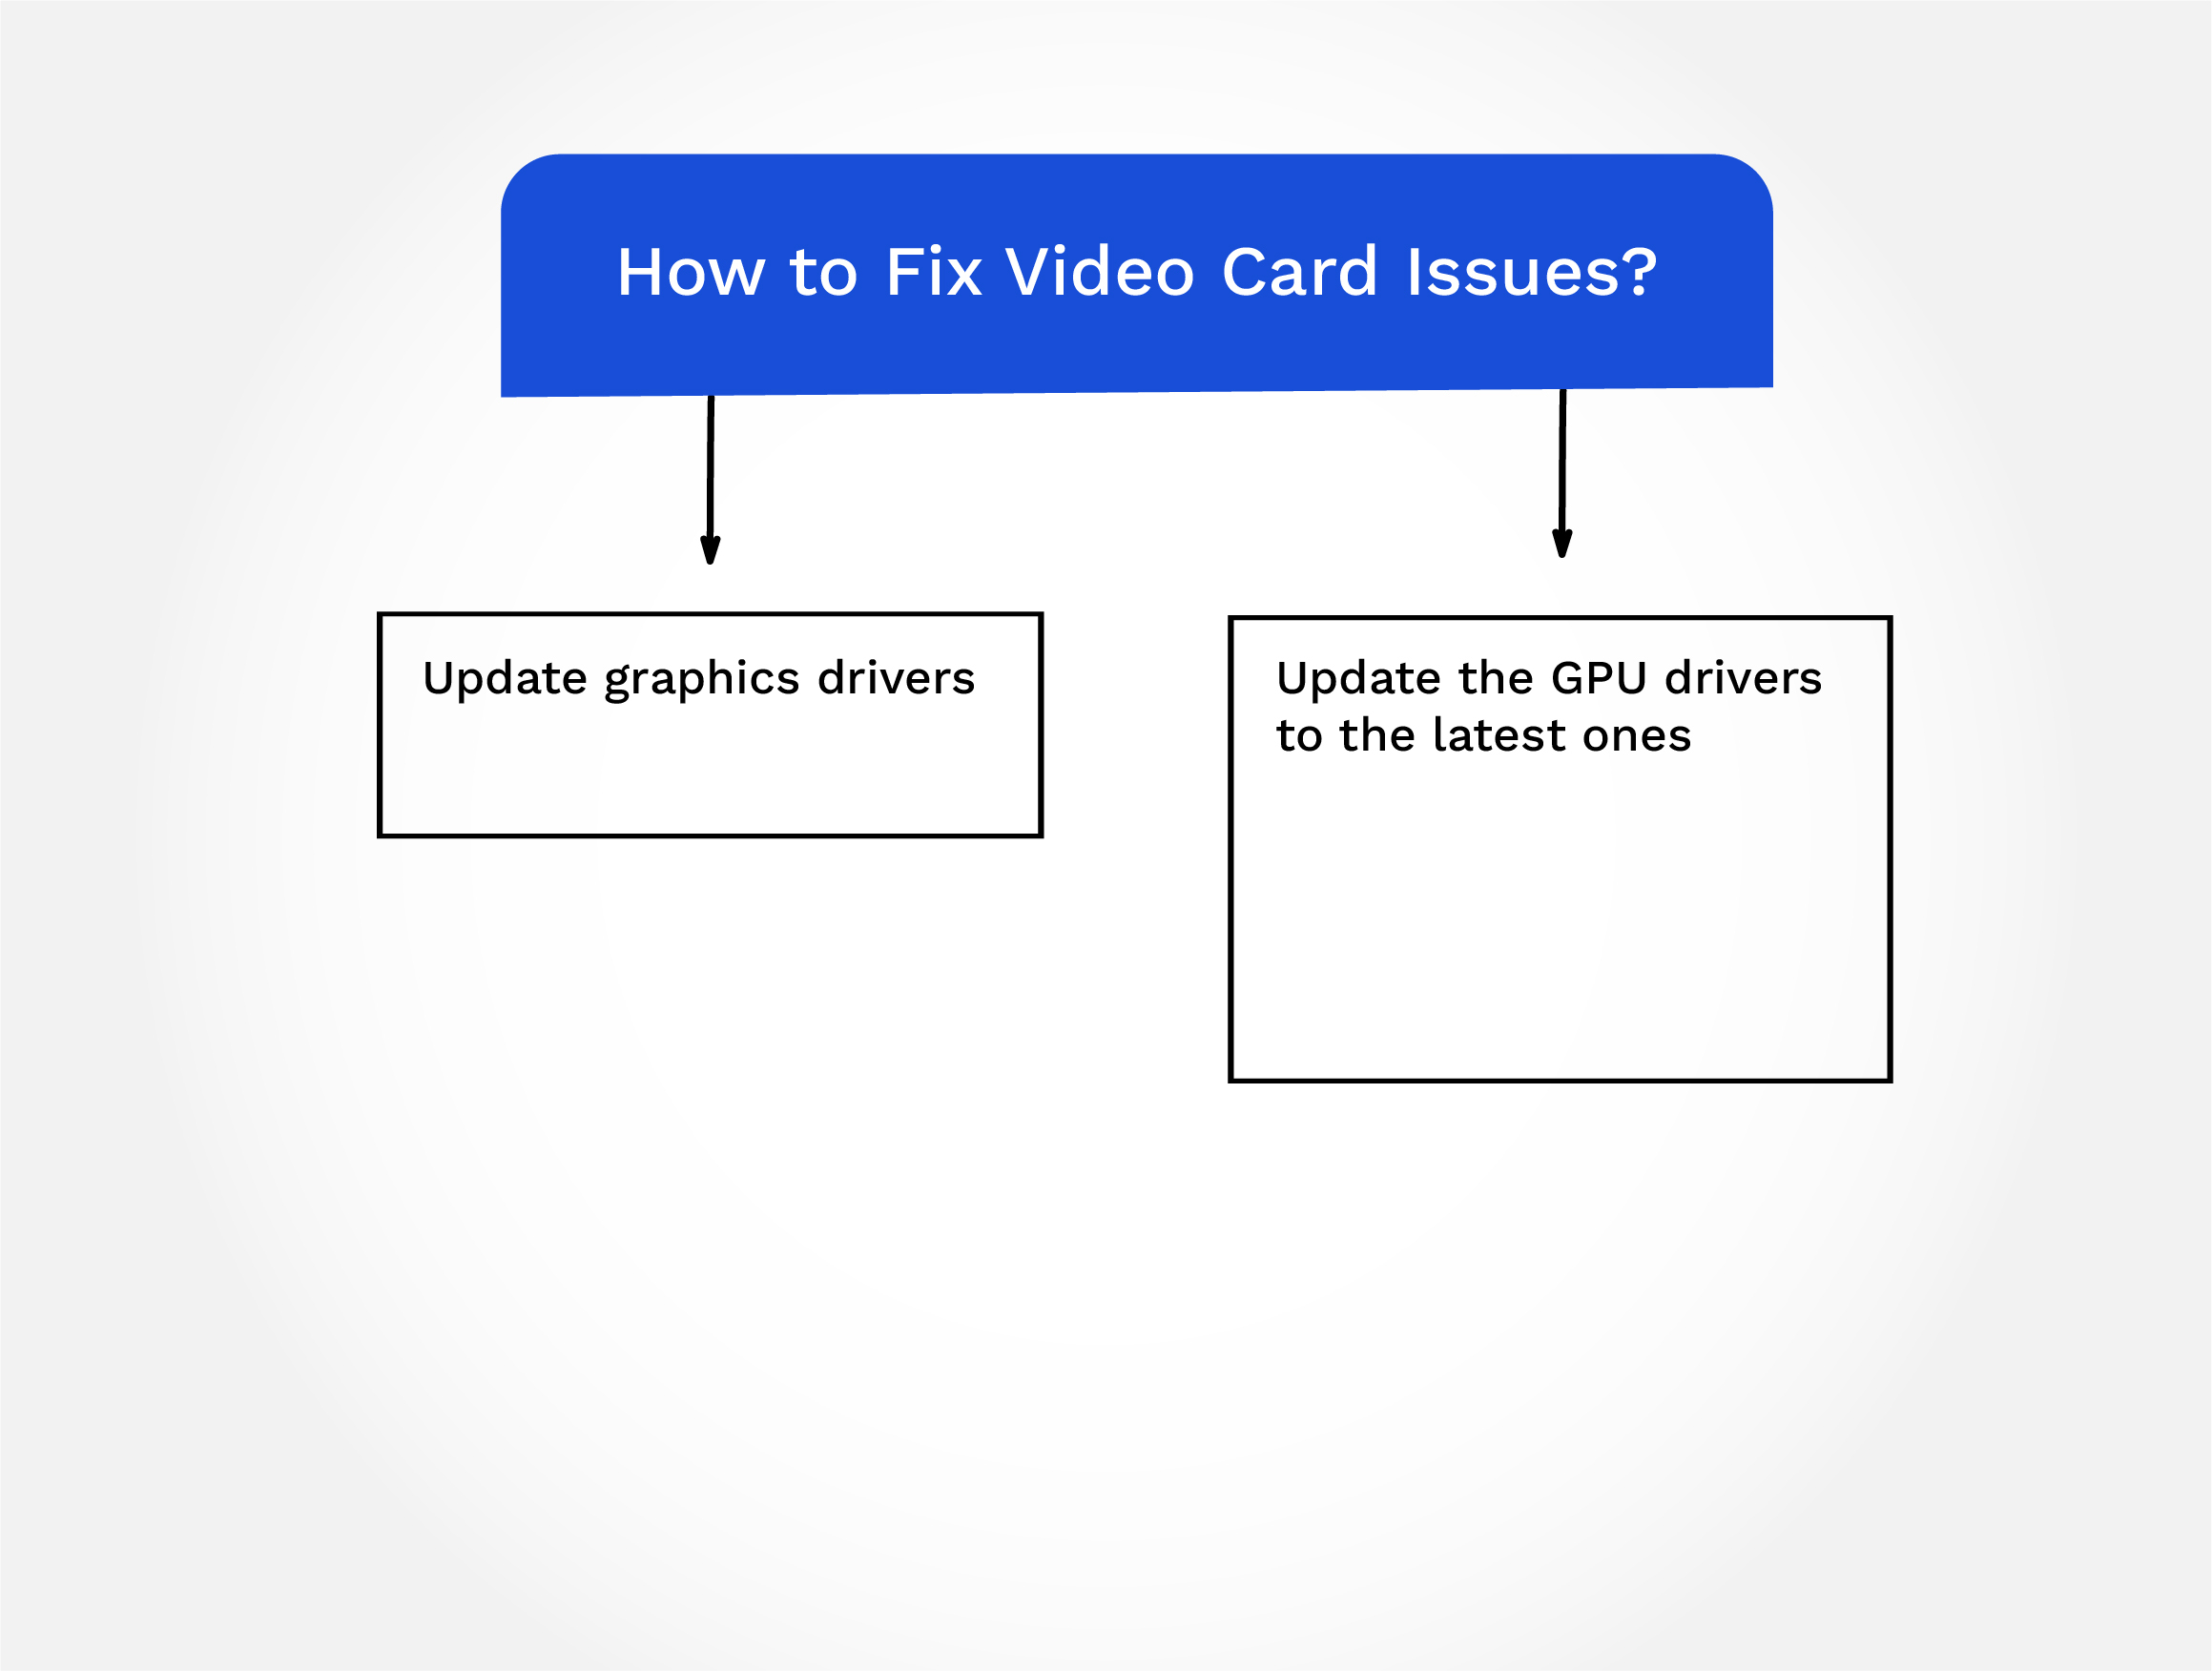 Fix Video Card Issues by Updating Graphics Drivers